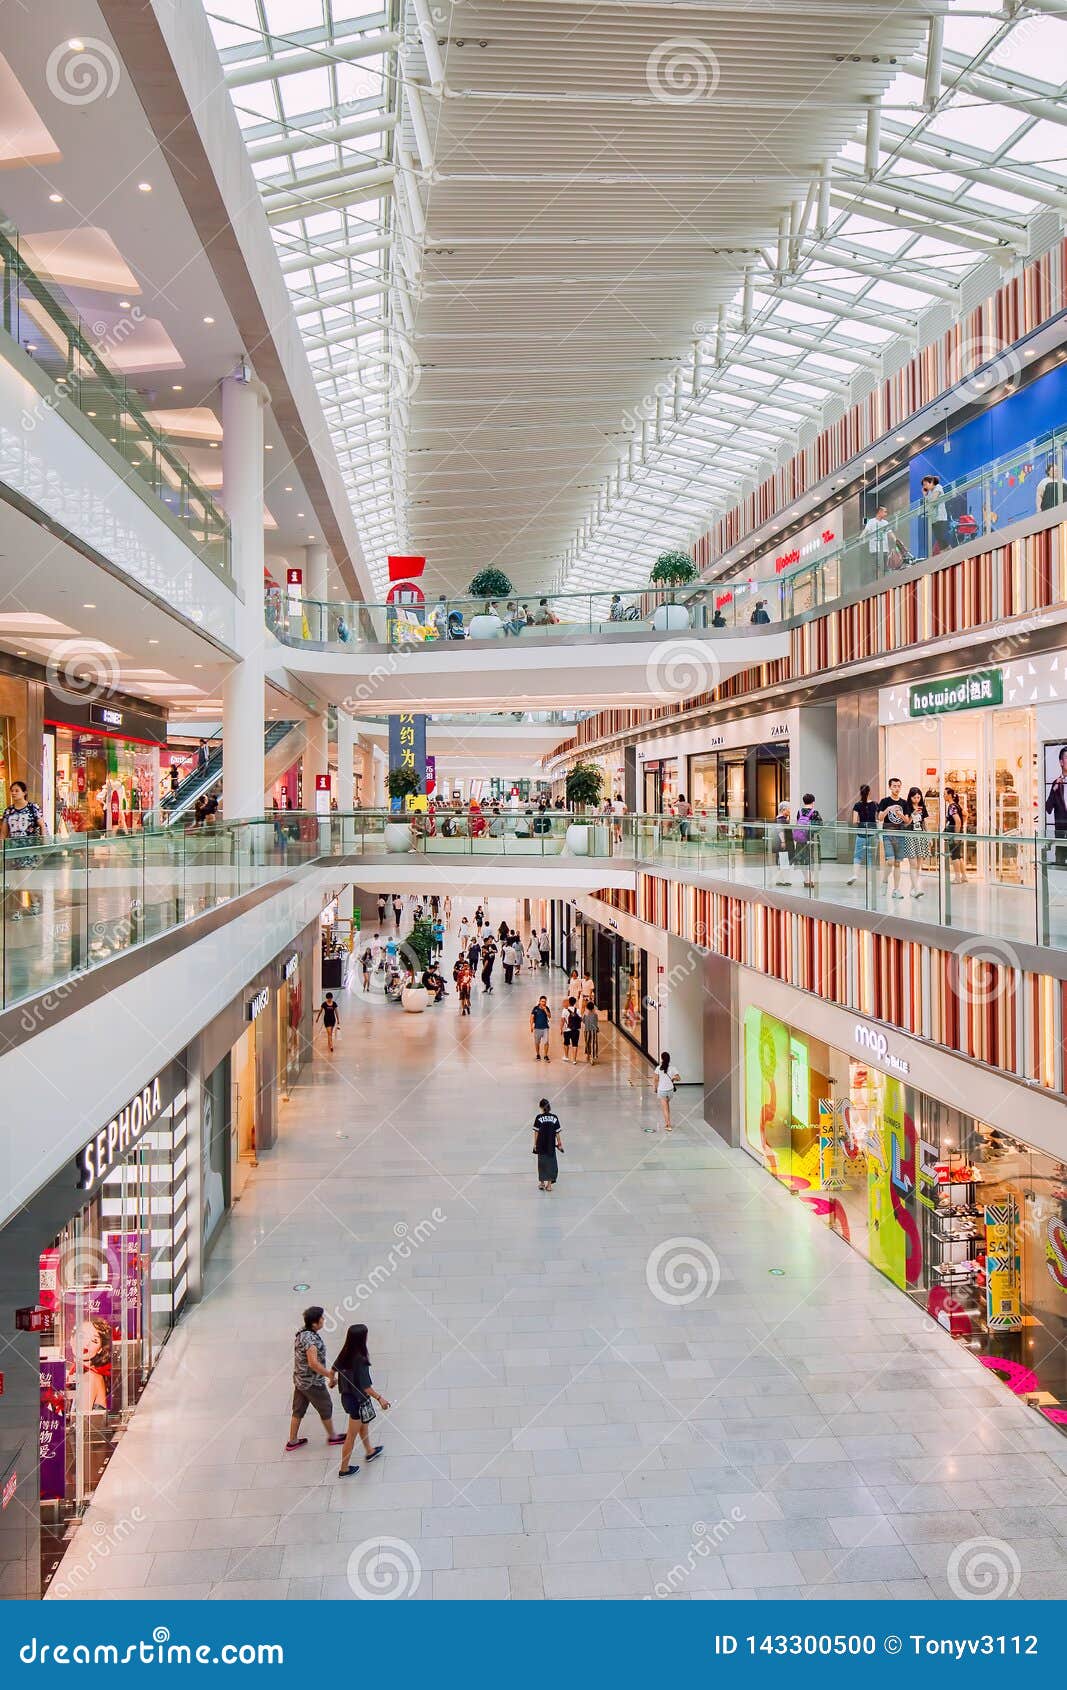 Livat Shopping Mall Interior With Shoppers, Beijing , China Editorial Image  - Image Of Design, Floors: 143300500